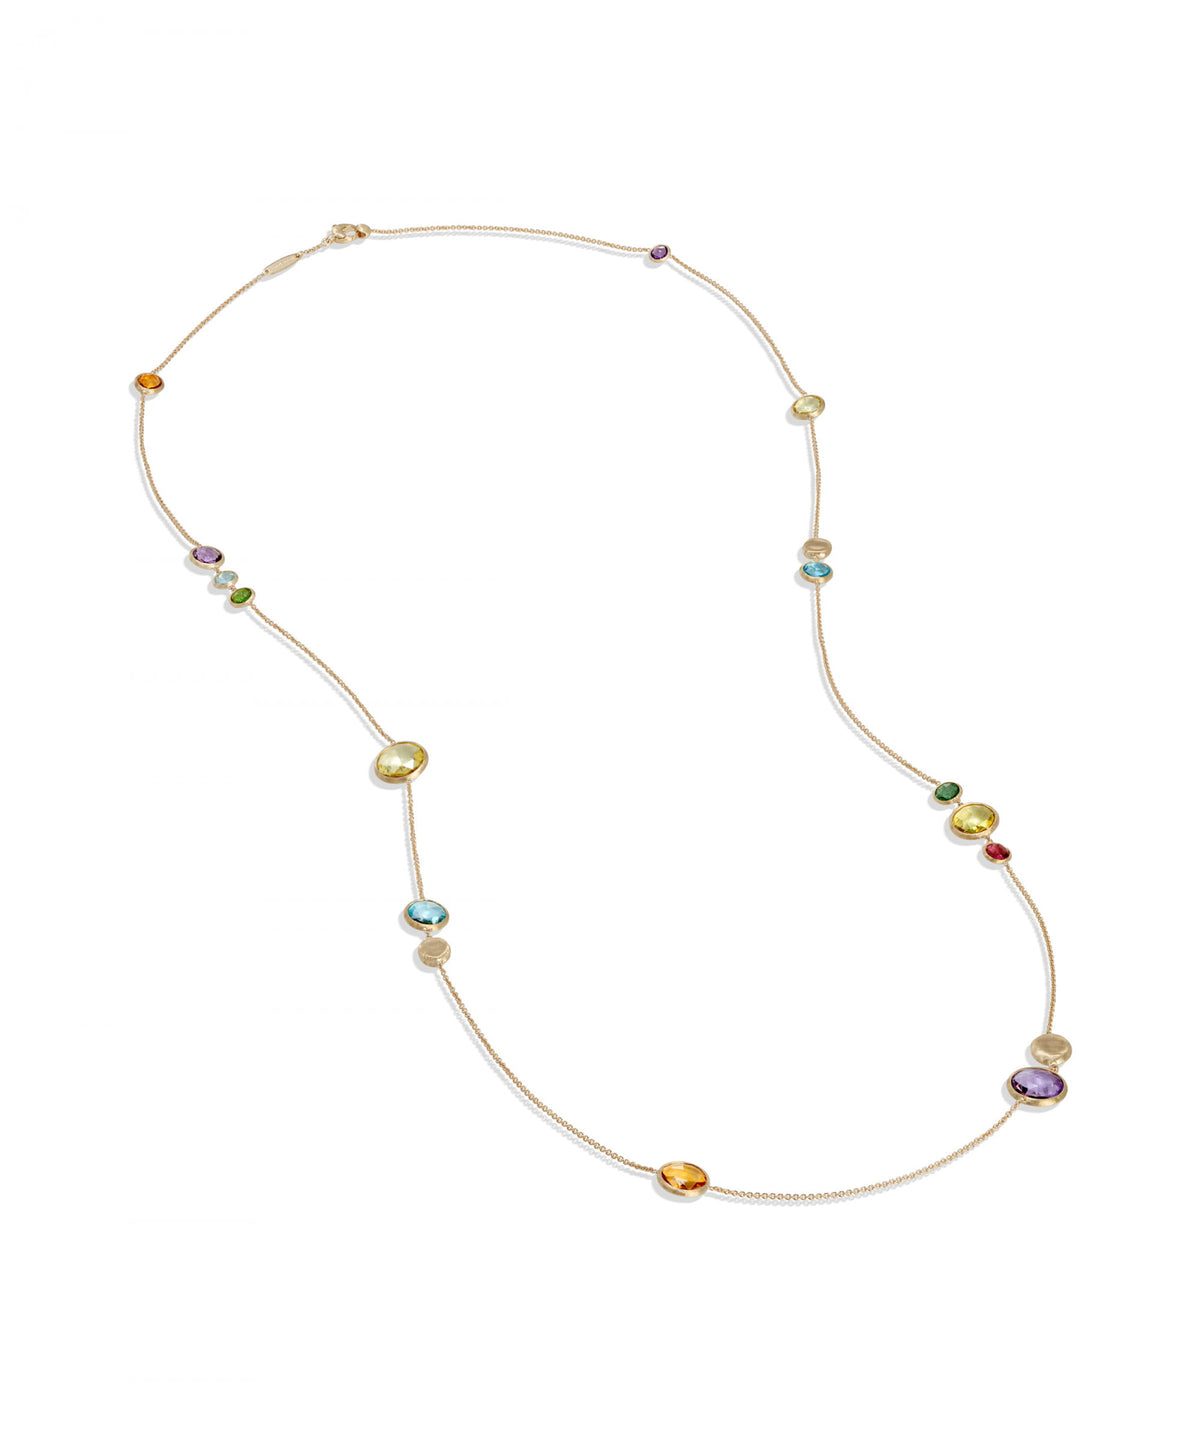 Jaipur Light Colour Necklace in 18k Yellow Gold with Mixed Gemstones Long - Orsini Jewellers NZ